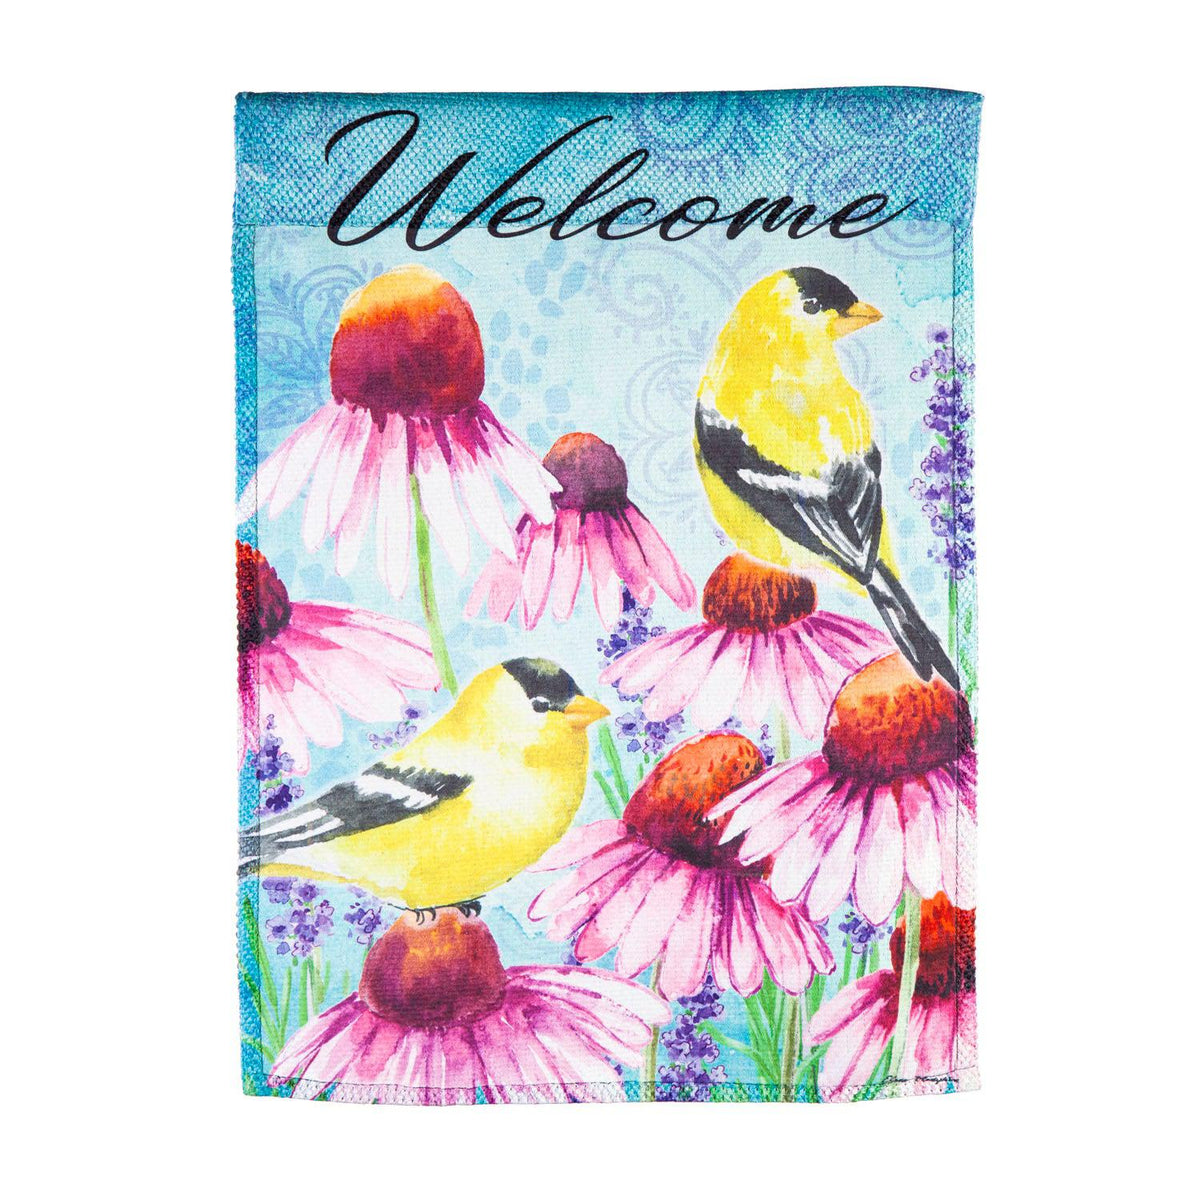 The Bright Flowers and Finches house banner features bright yellow finches resting among pink coneflowers, and the word "Welcome" across the top.